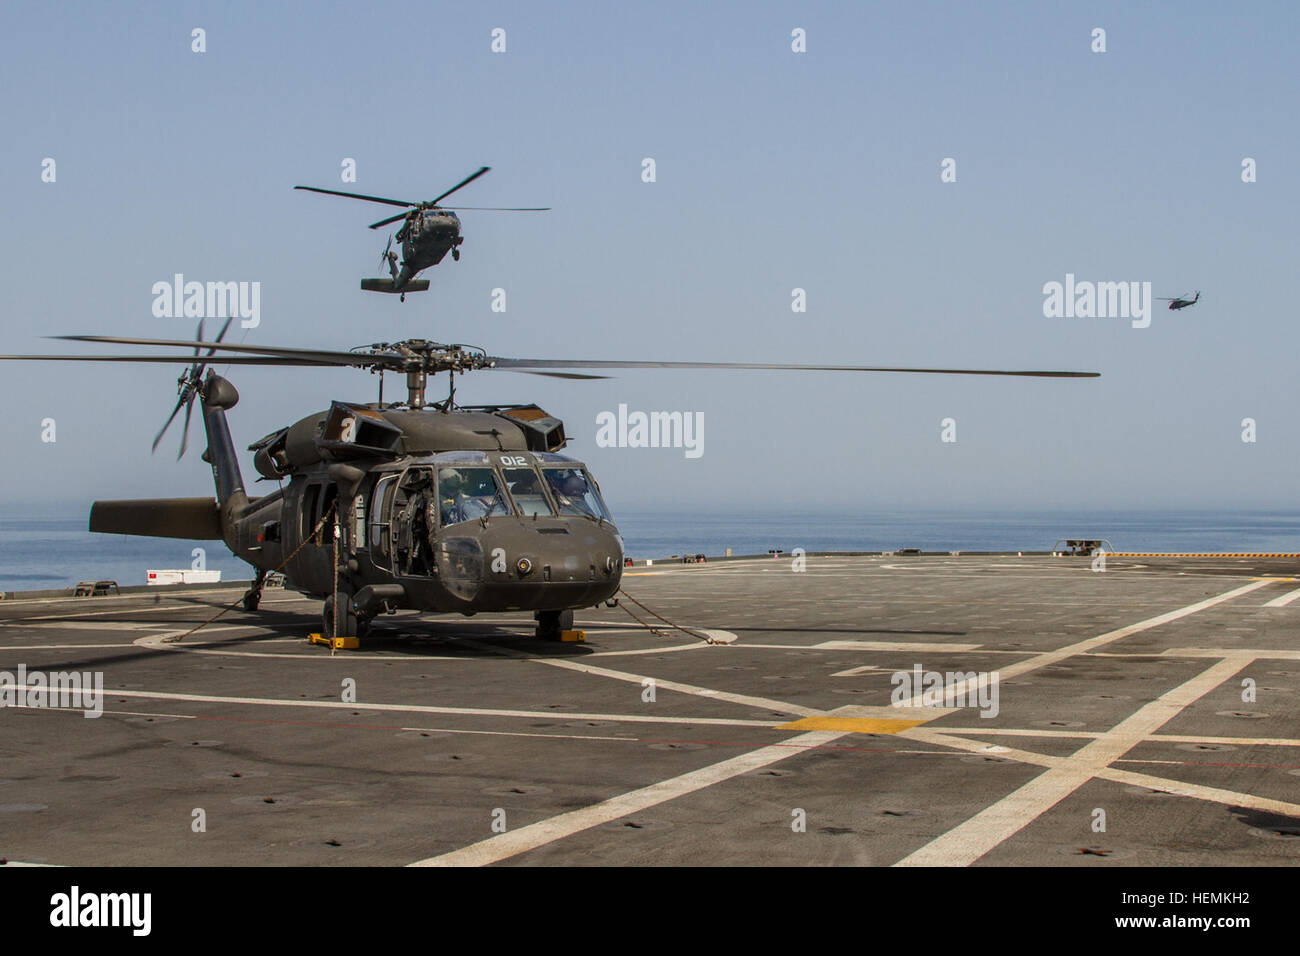 UH-60 Black Hawk helicopters from Alpha Company, 1-207th Aviation Regiment (Alaska Army National Guard) land on the flight deck of the USS Ponce AFSB(I)15 during training operations in the Persian Gulf. The company is currently deployed to the Middle East in support of Operation Enduring Freedom. (U.S. Army photo by Sgt. Mark Scovell/Released) Alaska soldiers navigate from desert to sea 062113-A-AY590-044 Stock Photo